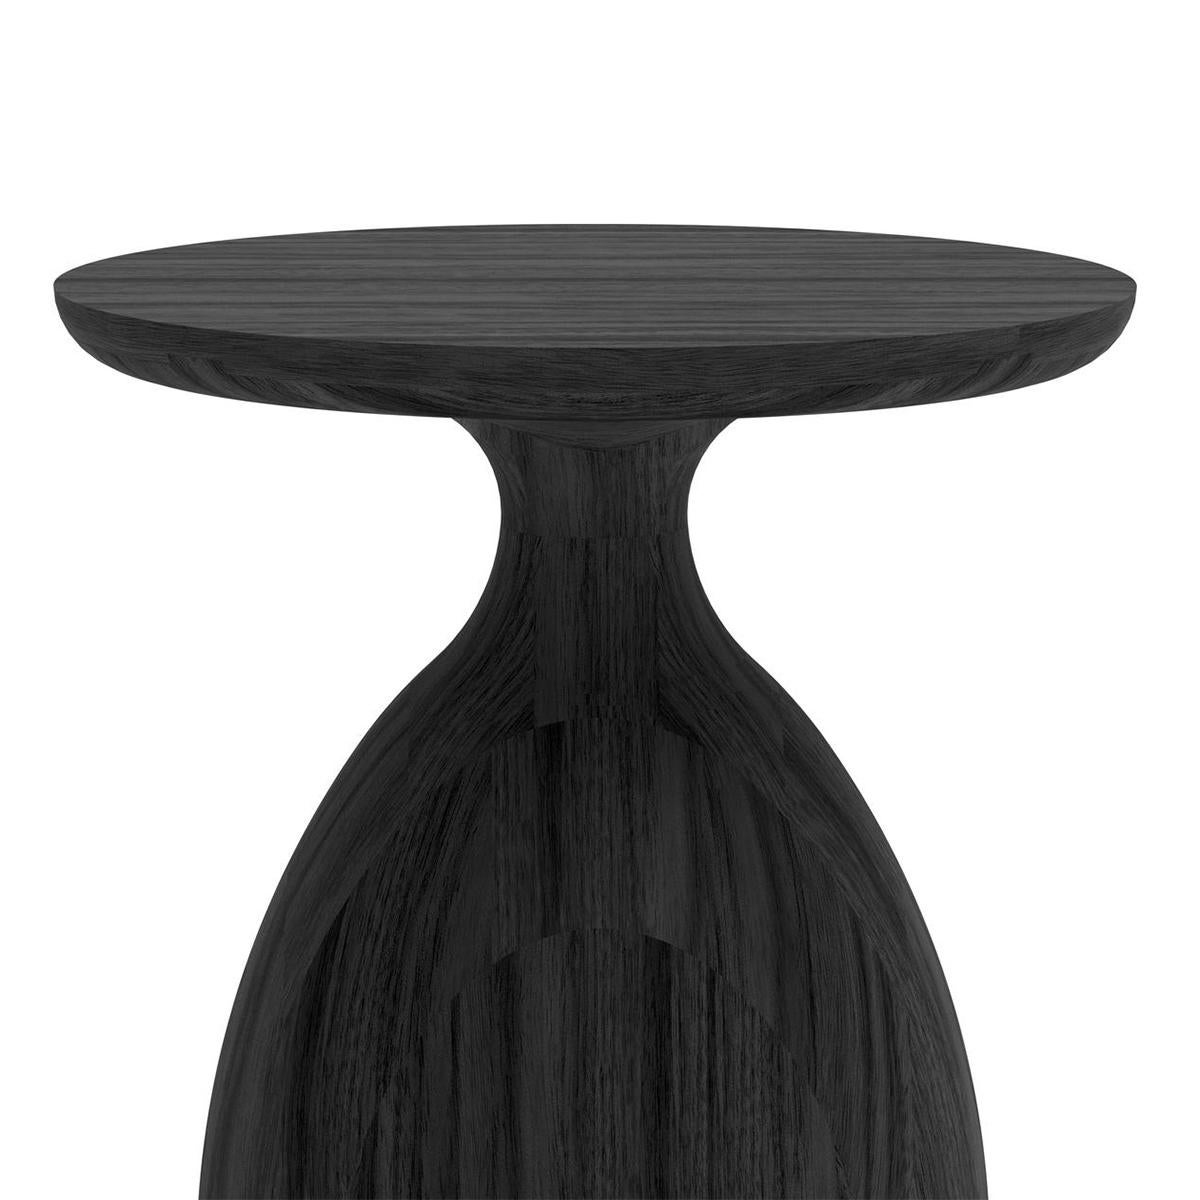 Side Table Eko Black Medium with all structure in
solid teak in black stained finish. Teak with water 
repellent treatment.